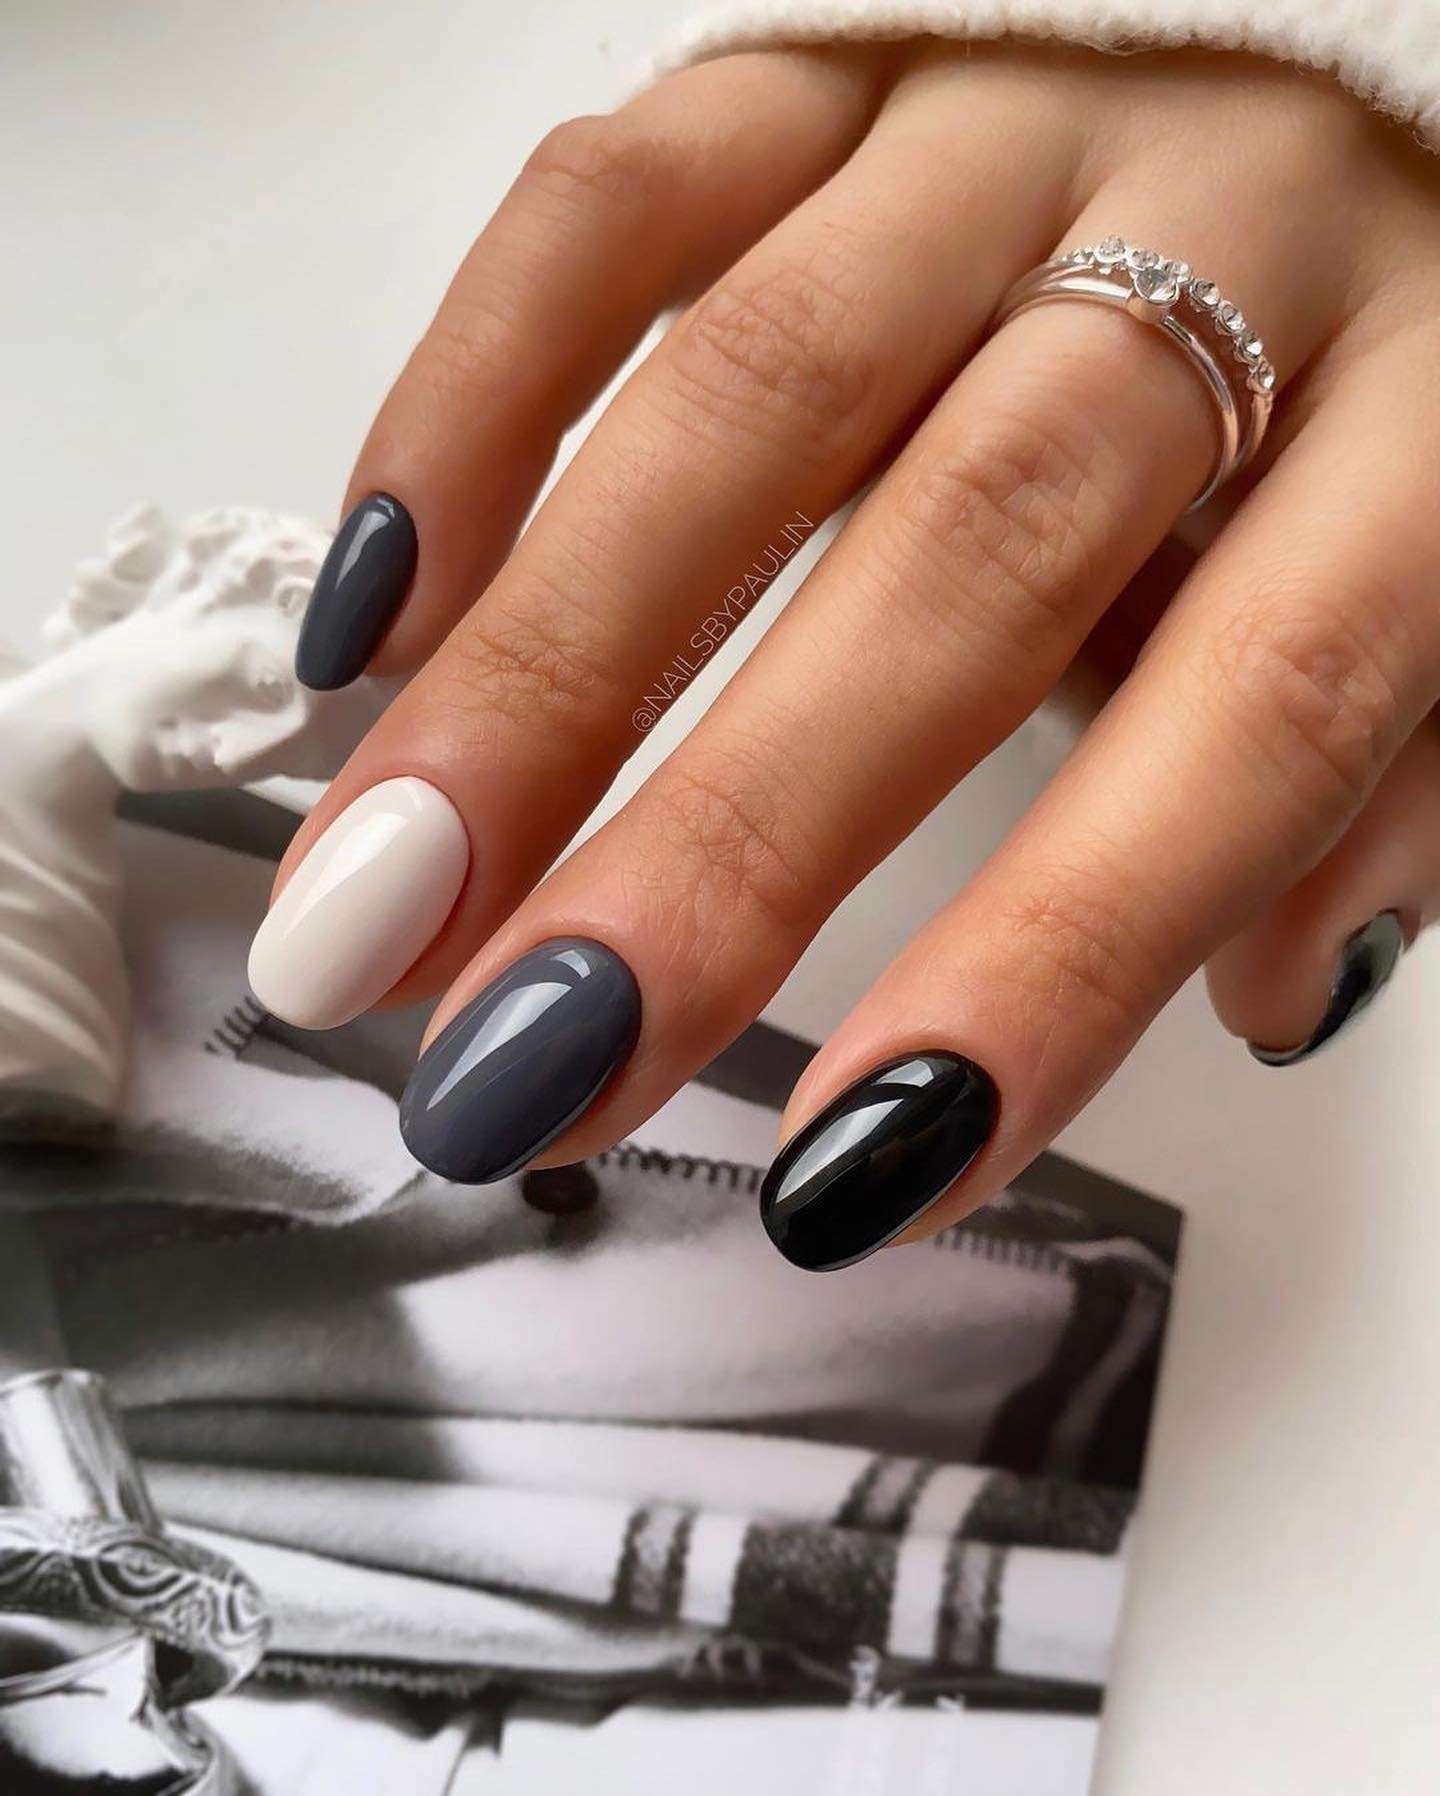 35 Nail Designs For 2022 You’ll Want To Try Immediately images 23